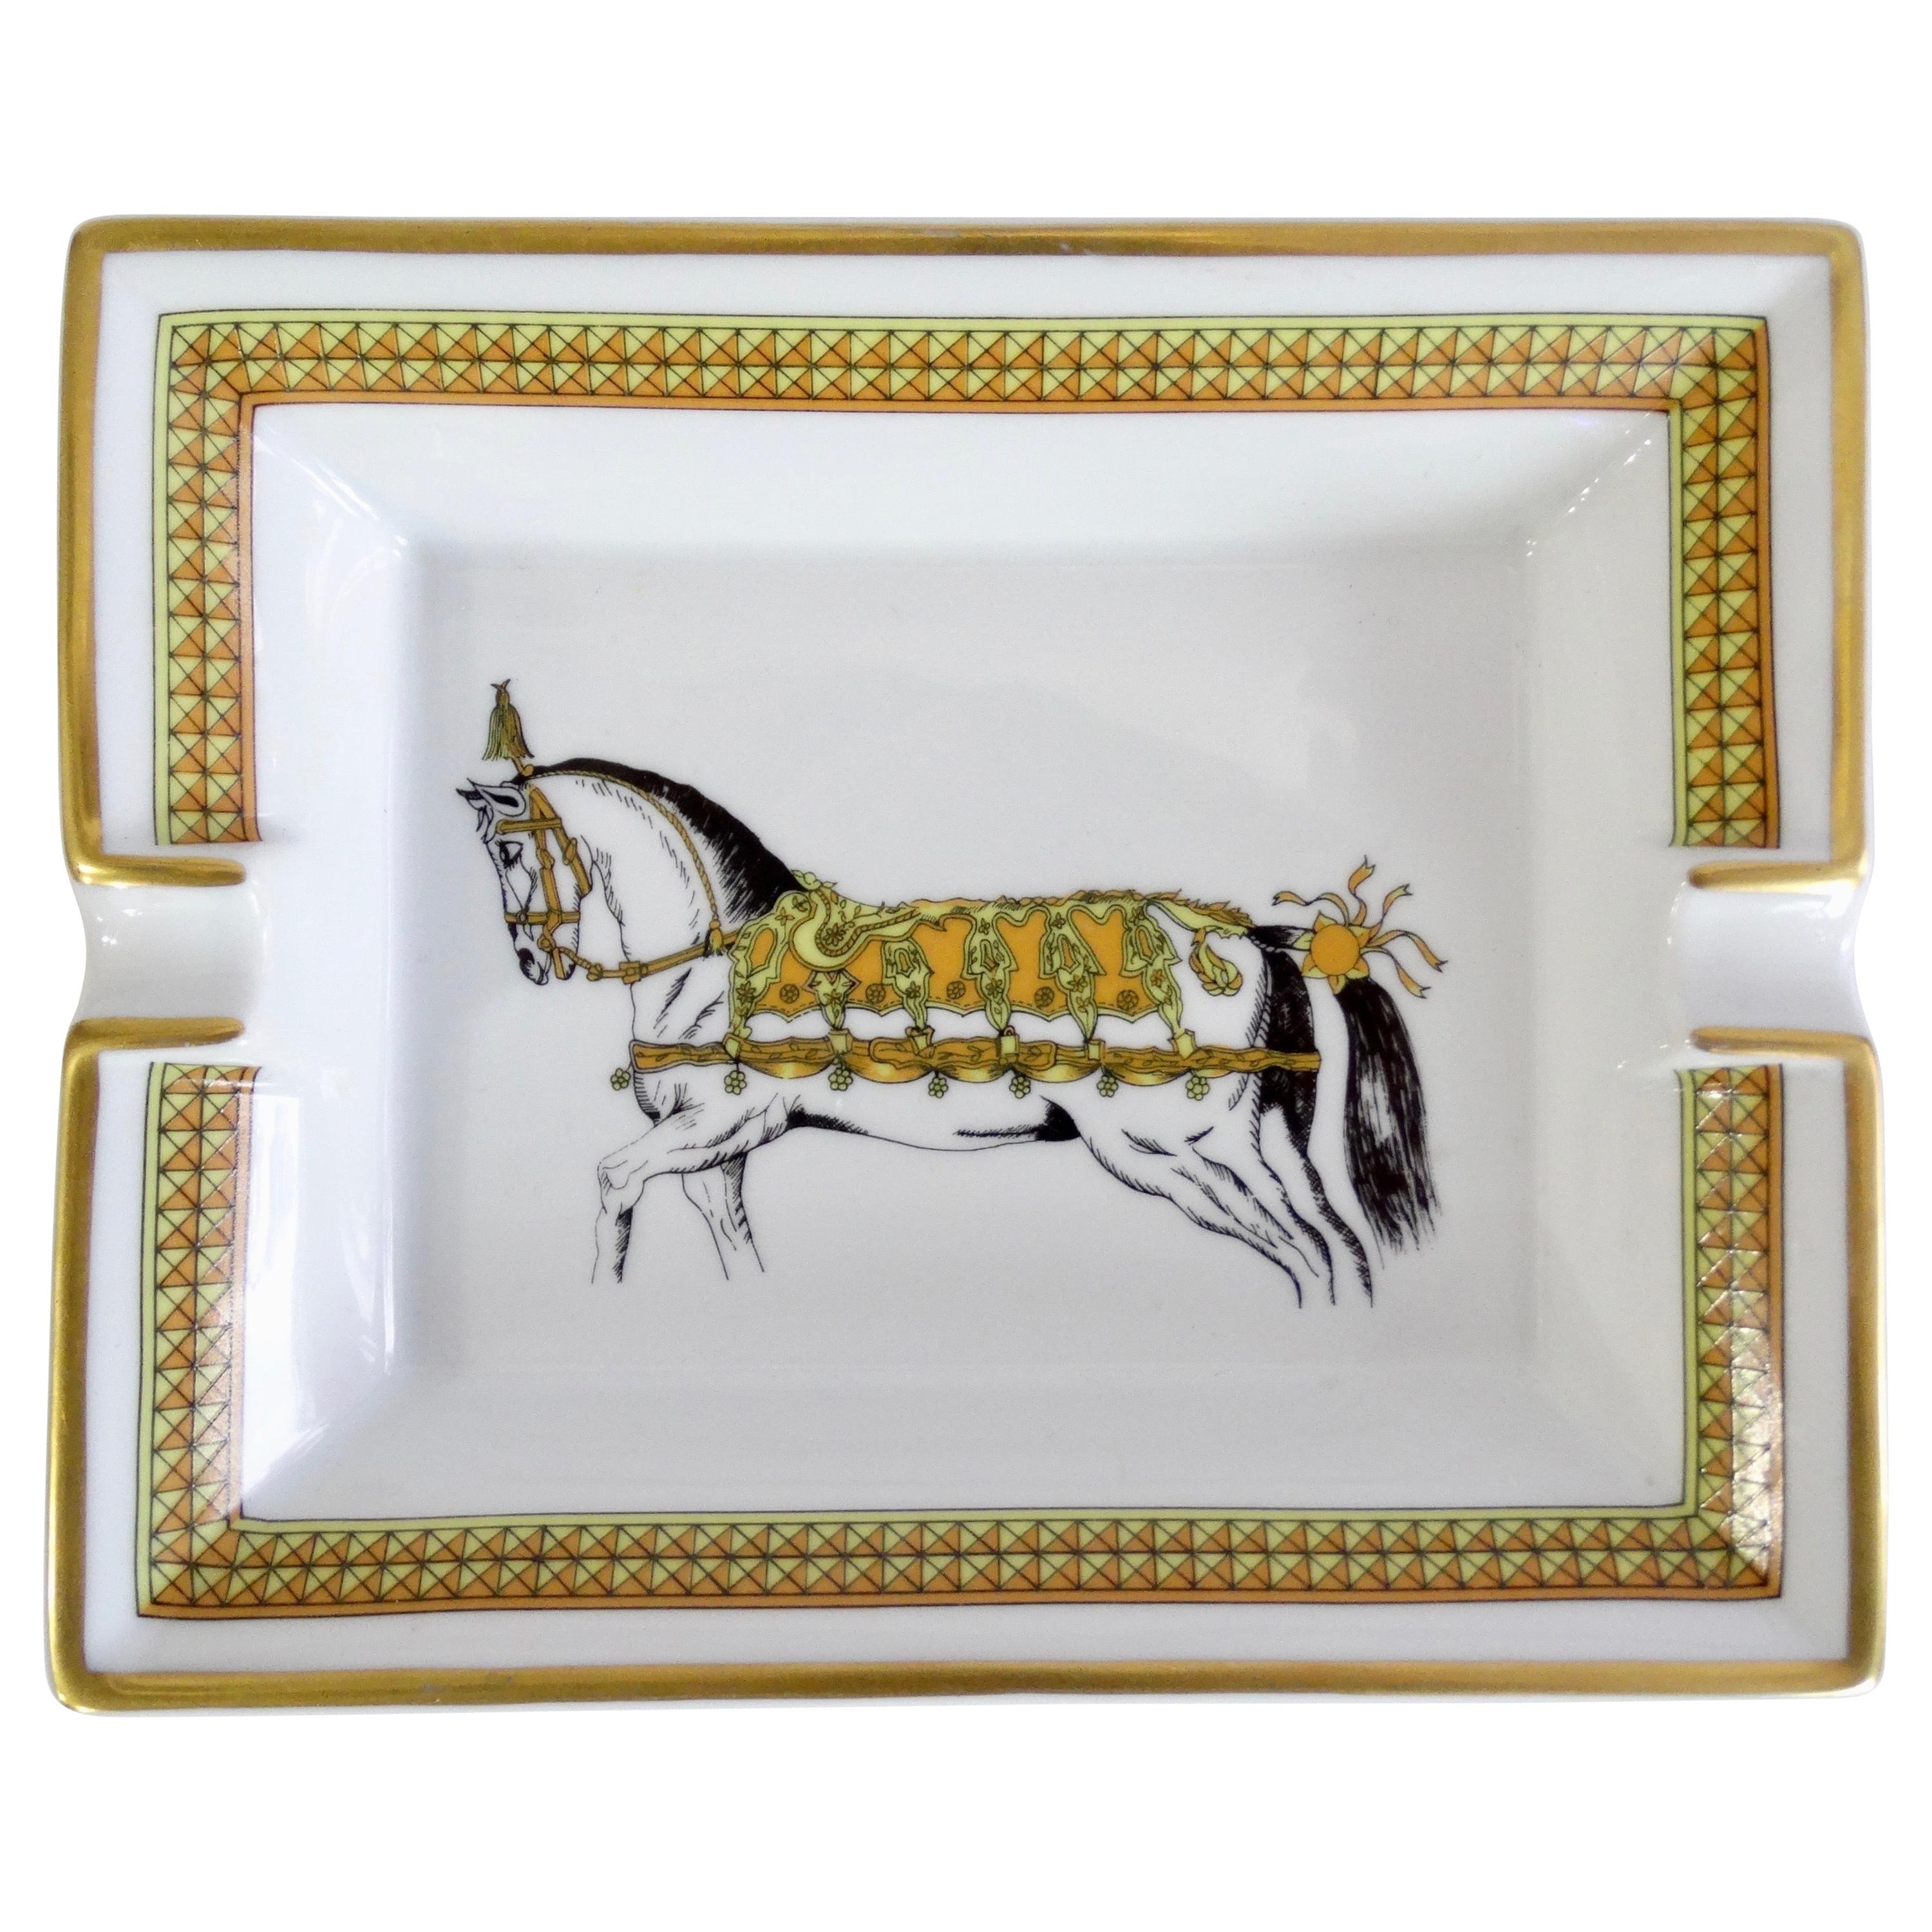 Hermés 2000s Decorated Cheval Horse Porcelain Tray